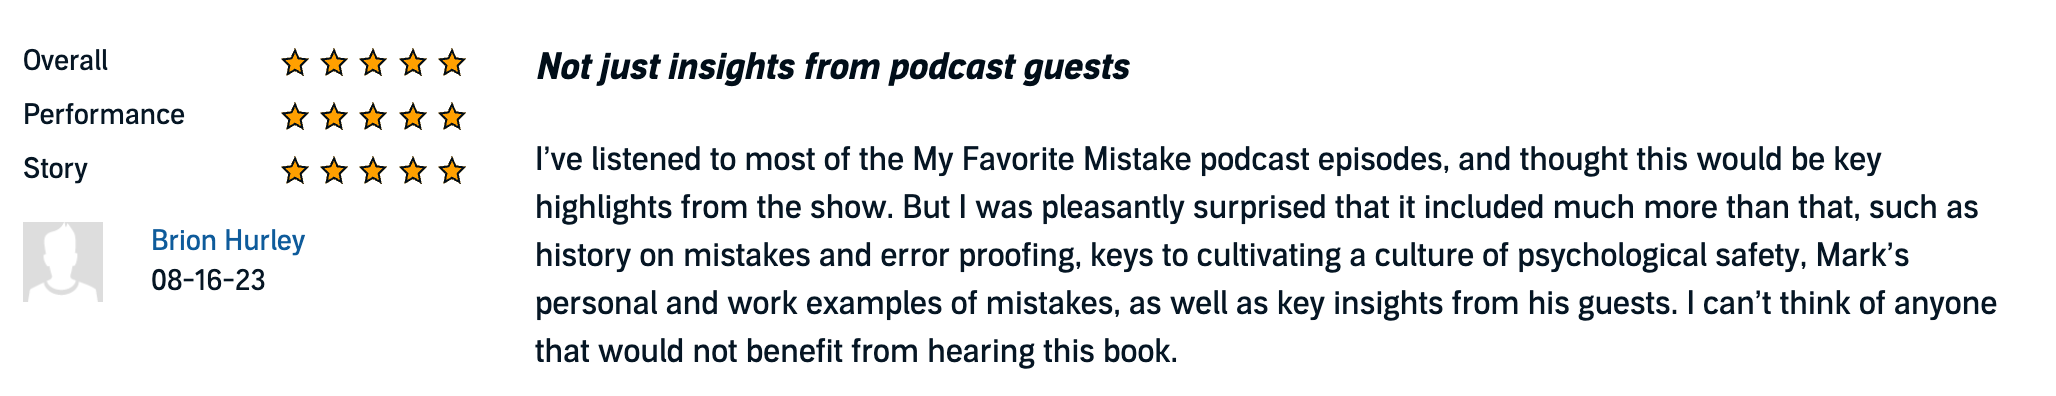 Not just insights from podcast guests
I’ve listened to most of the My Favorite Mistake podcast episodes, and thought this would be key highlights from the show. But I was pleasantly surprised that it included much more than that, such as history on mistakes and error proofing, keys to cultivating a culture of psychological safety, Mark’s personal and work examples of mistakes, as well as key insights from his guests. I can’t think of anyone that would not benefit from hearing this book.